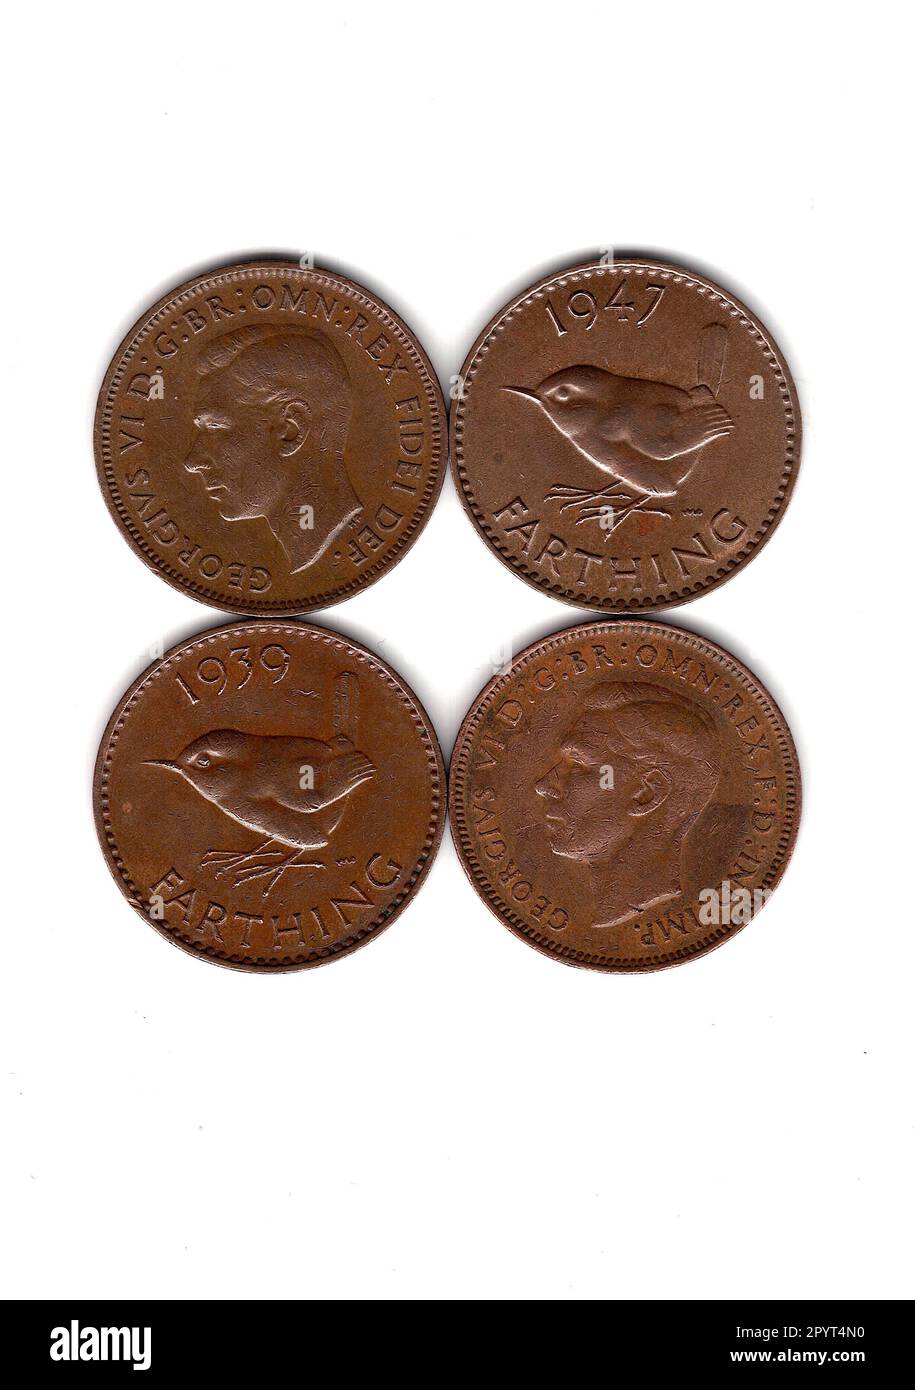 King George VI vintage farthing coins from Great Britain showing the front and reverse. Stock Photo